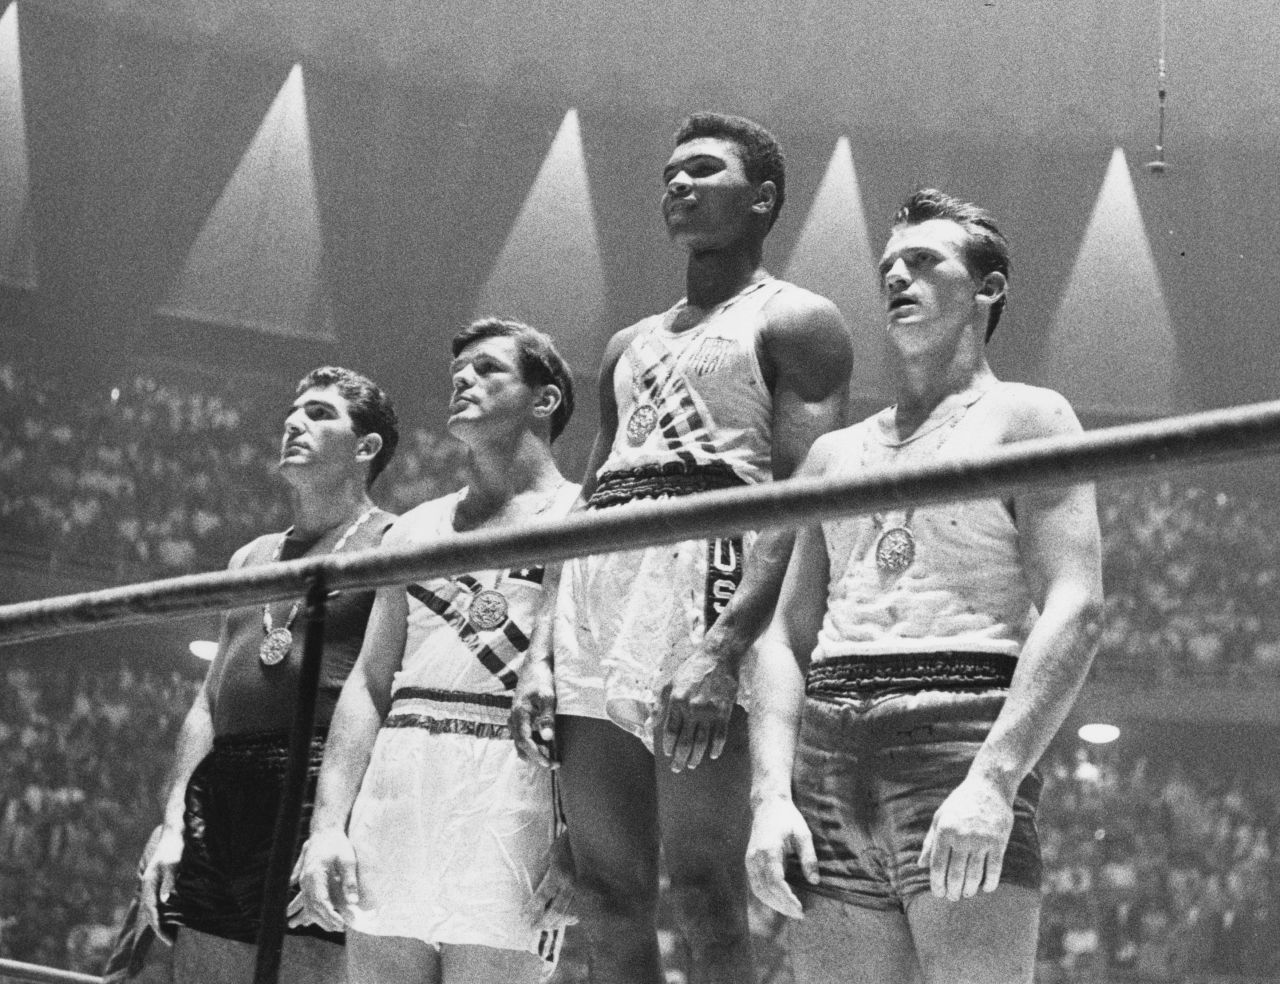 Before he was "The Greatest," Muhammad Ali was Cassius Clay, a modern-day gladiator who won boxing's light heavyweight gold medal in Italy's historic capital.